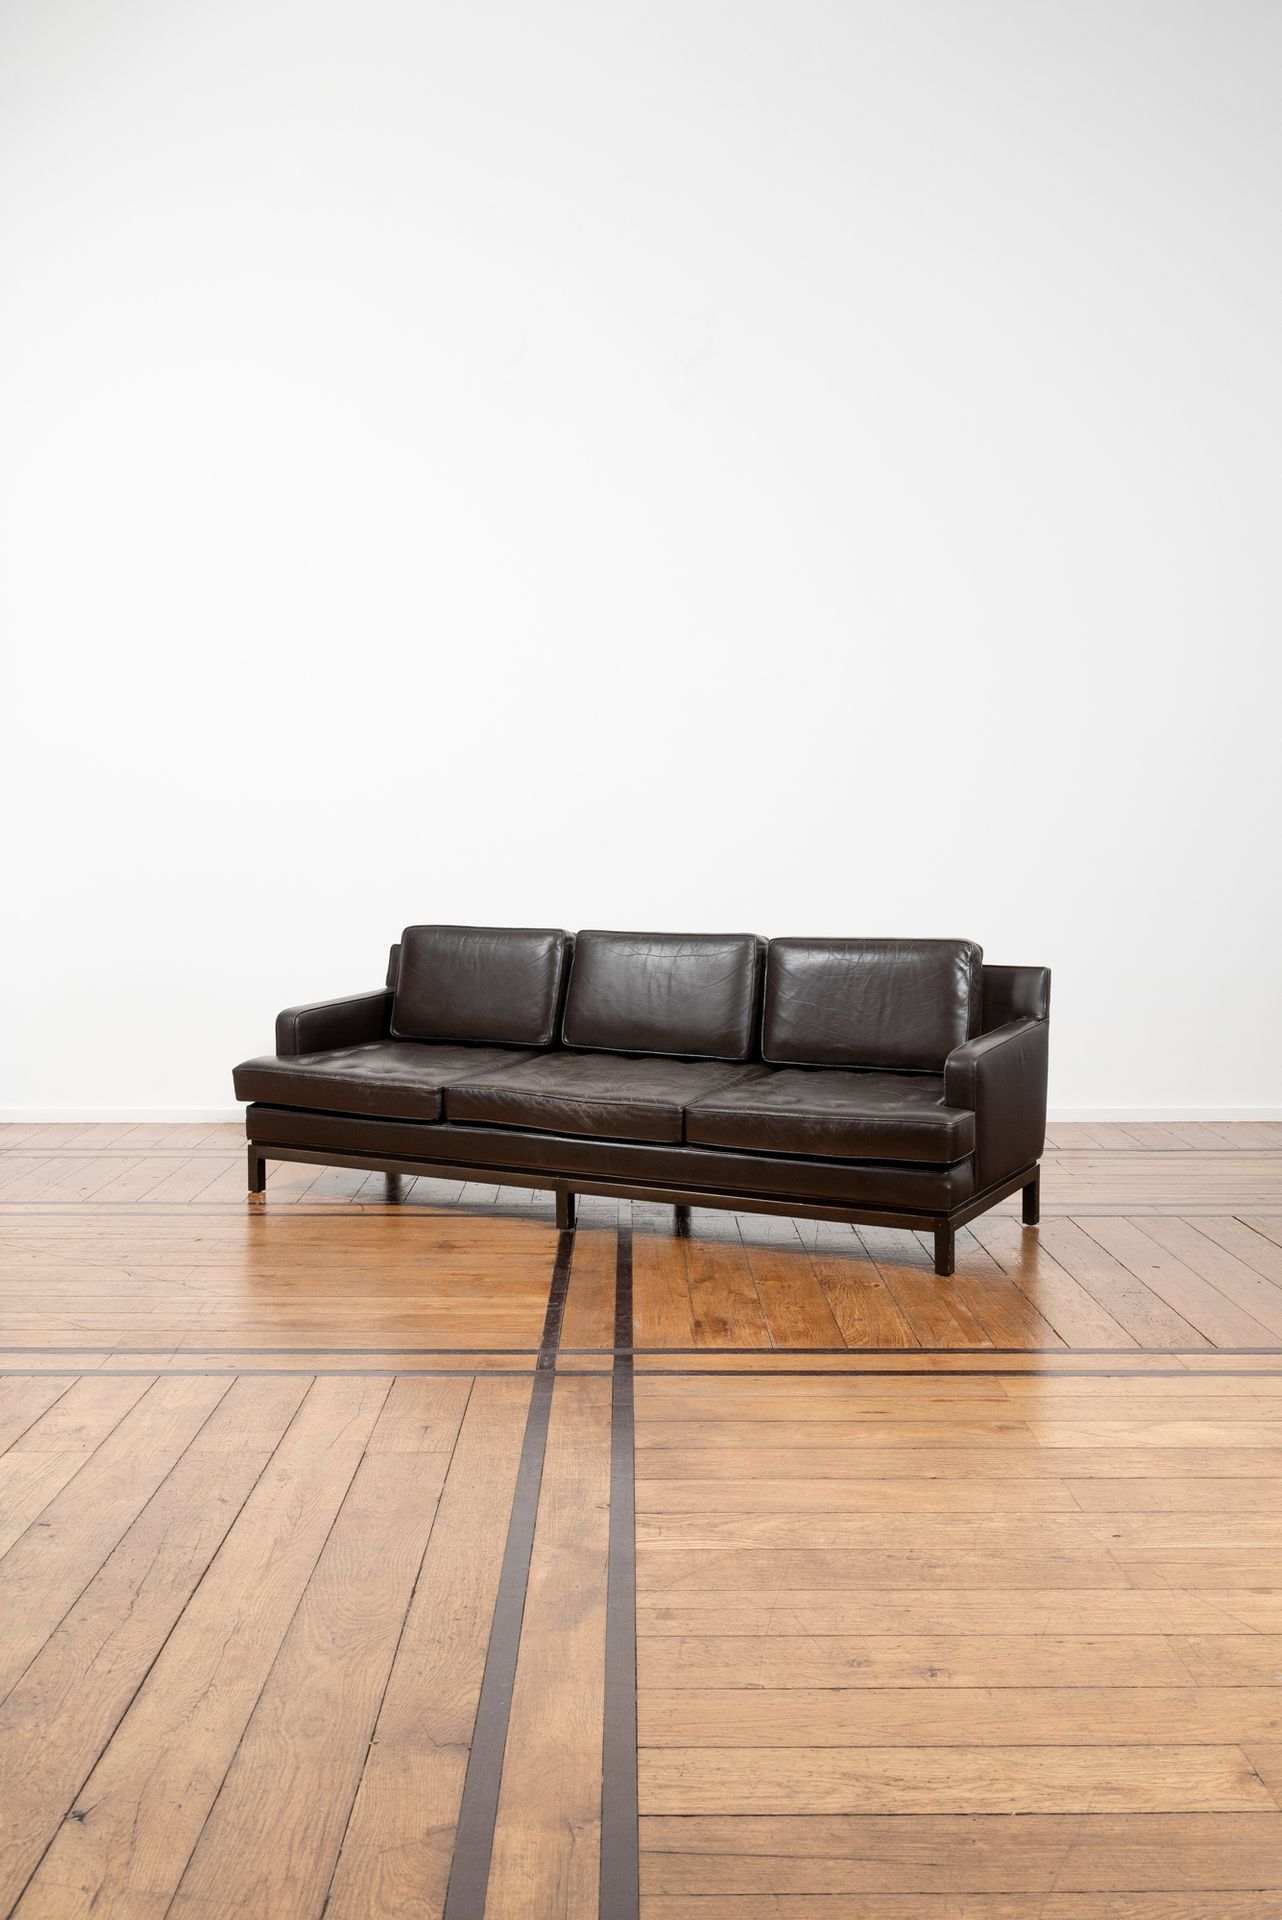 EDwARD J. WORMLEY (1907-1995) Three-seater sofa
Upholstered leather and dark woo&hellip;